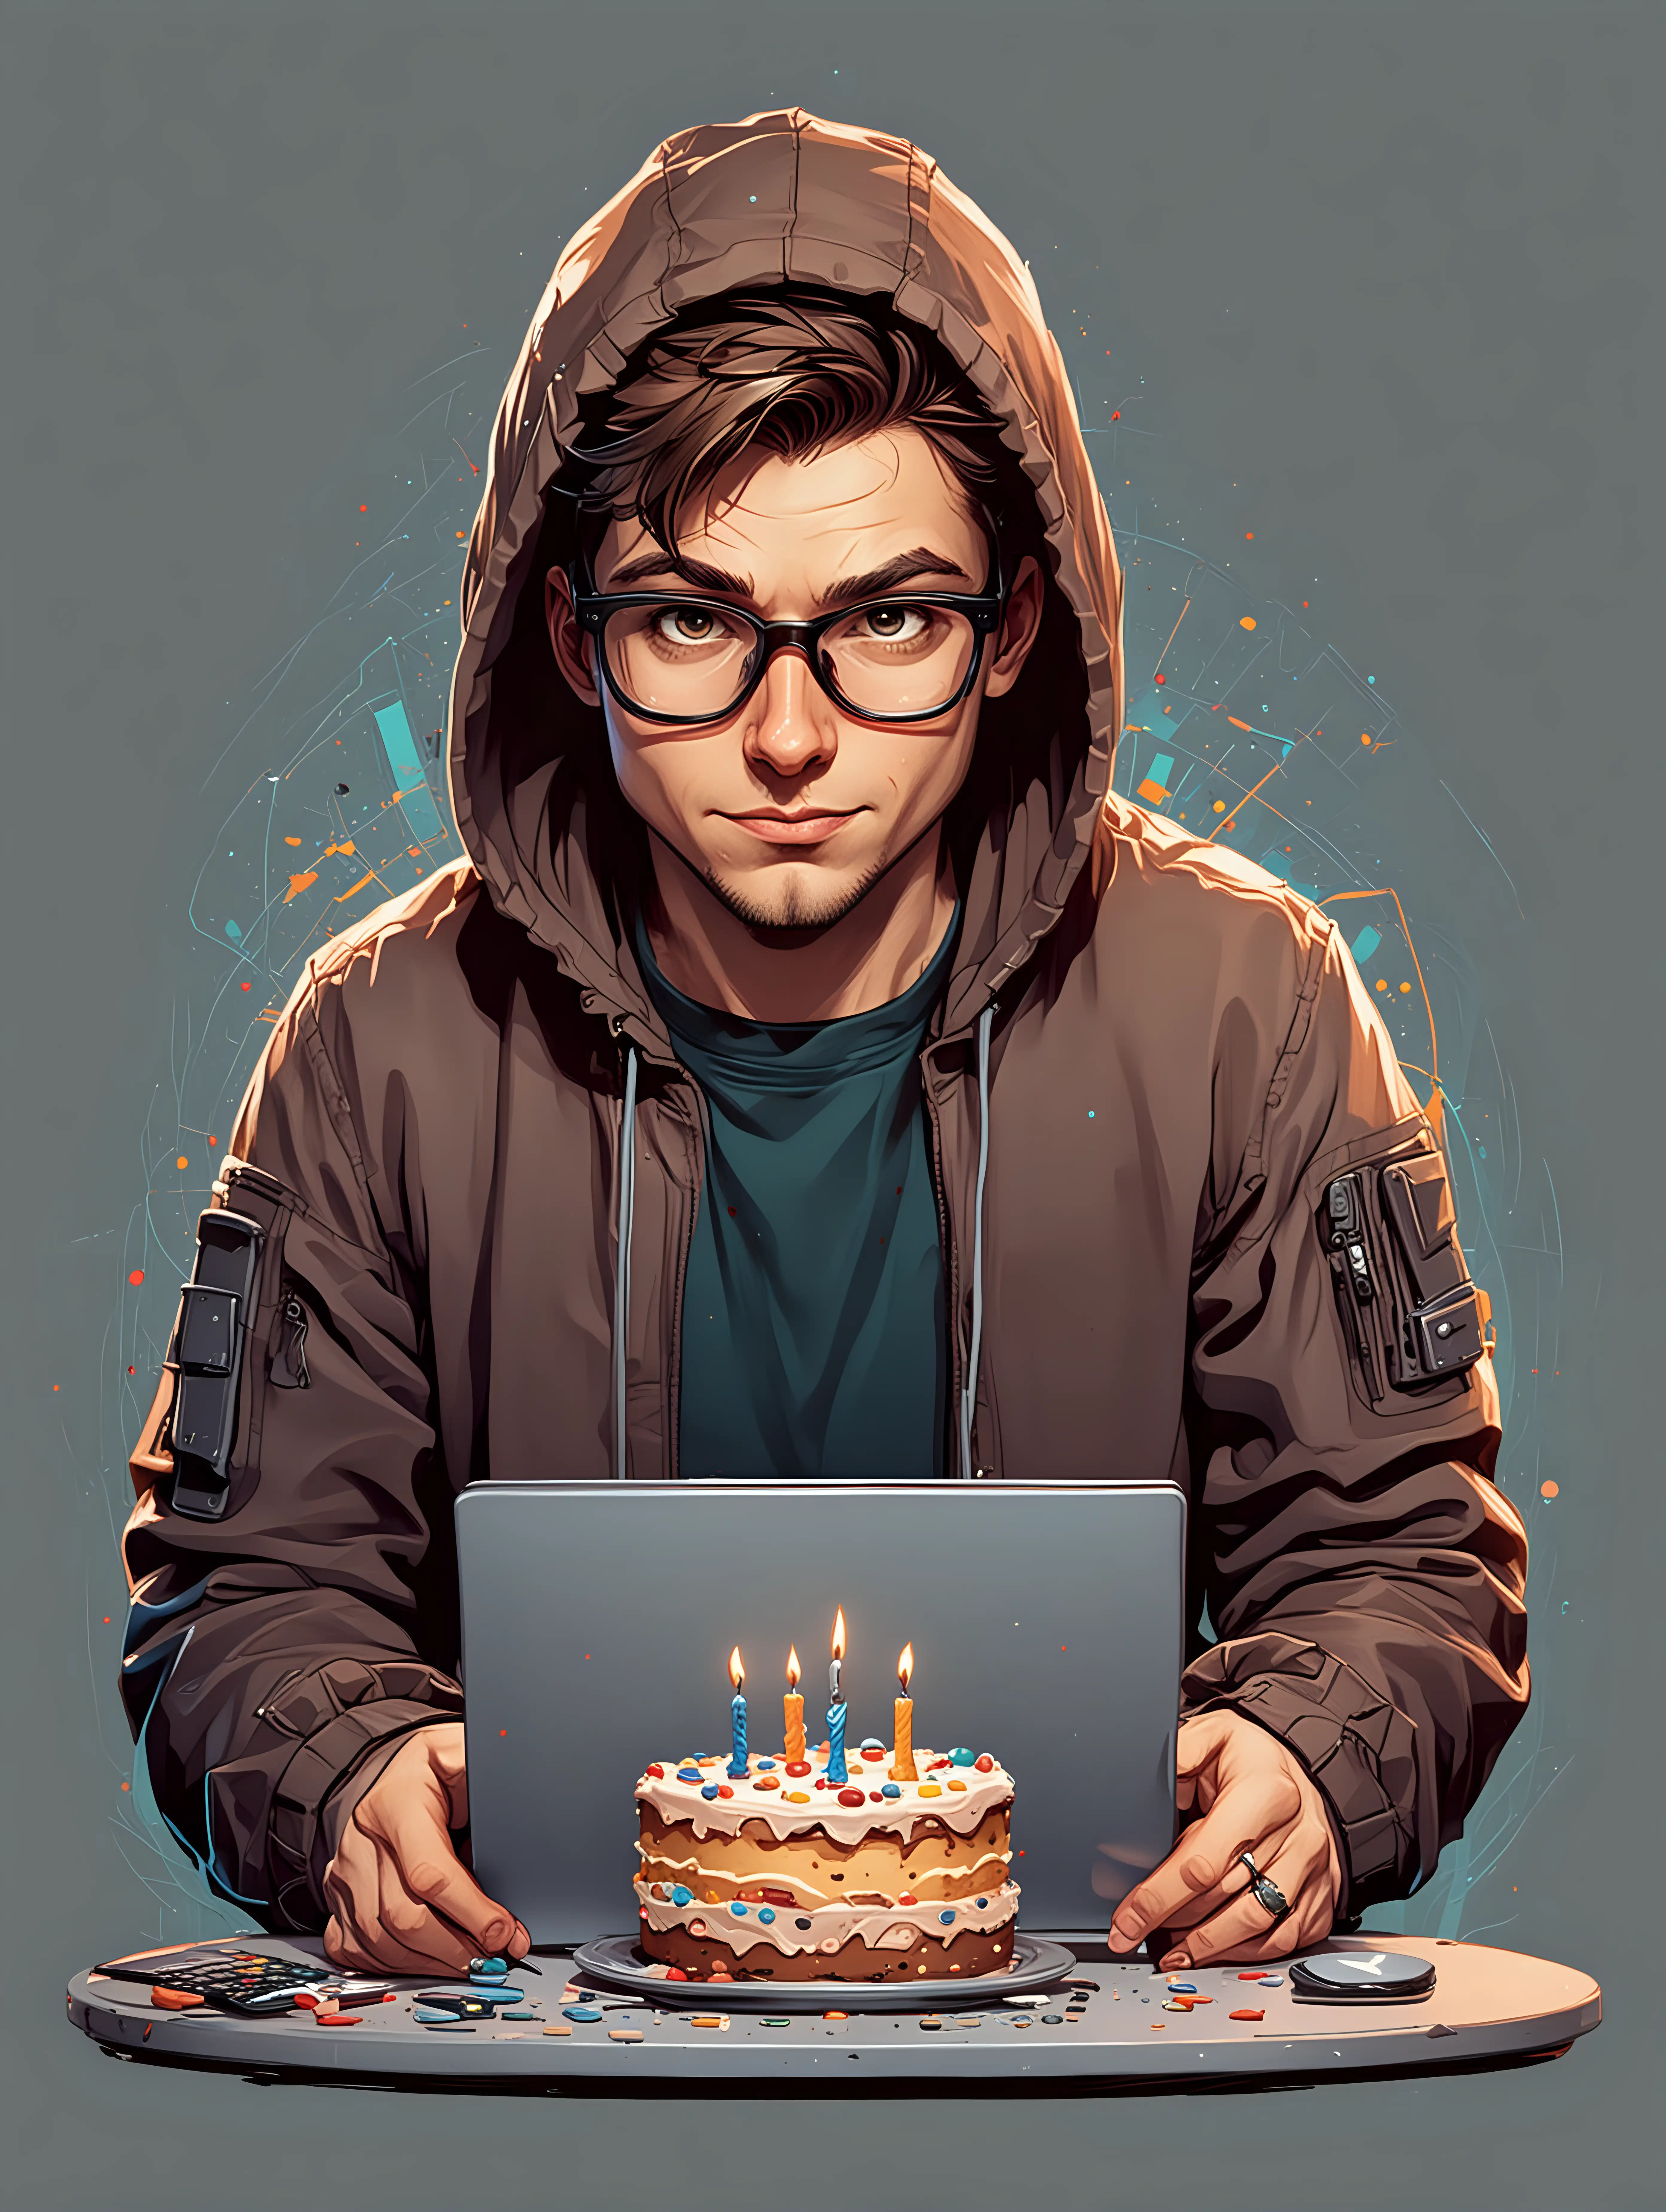 male ethical hacker, cartoon style, tech color palette, birthday cake, birthday theme